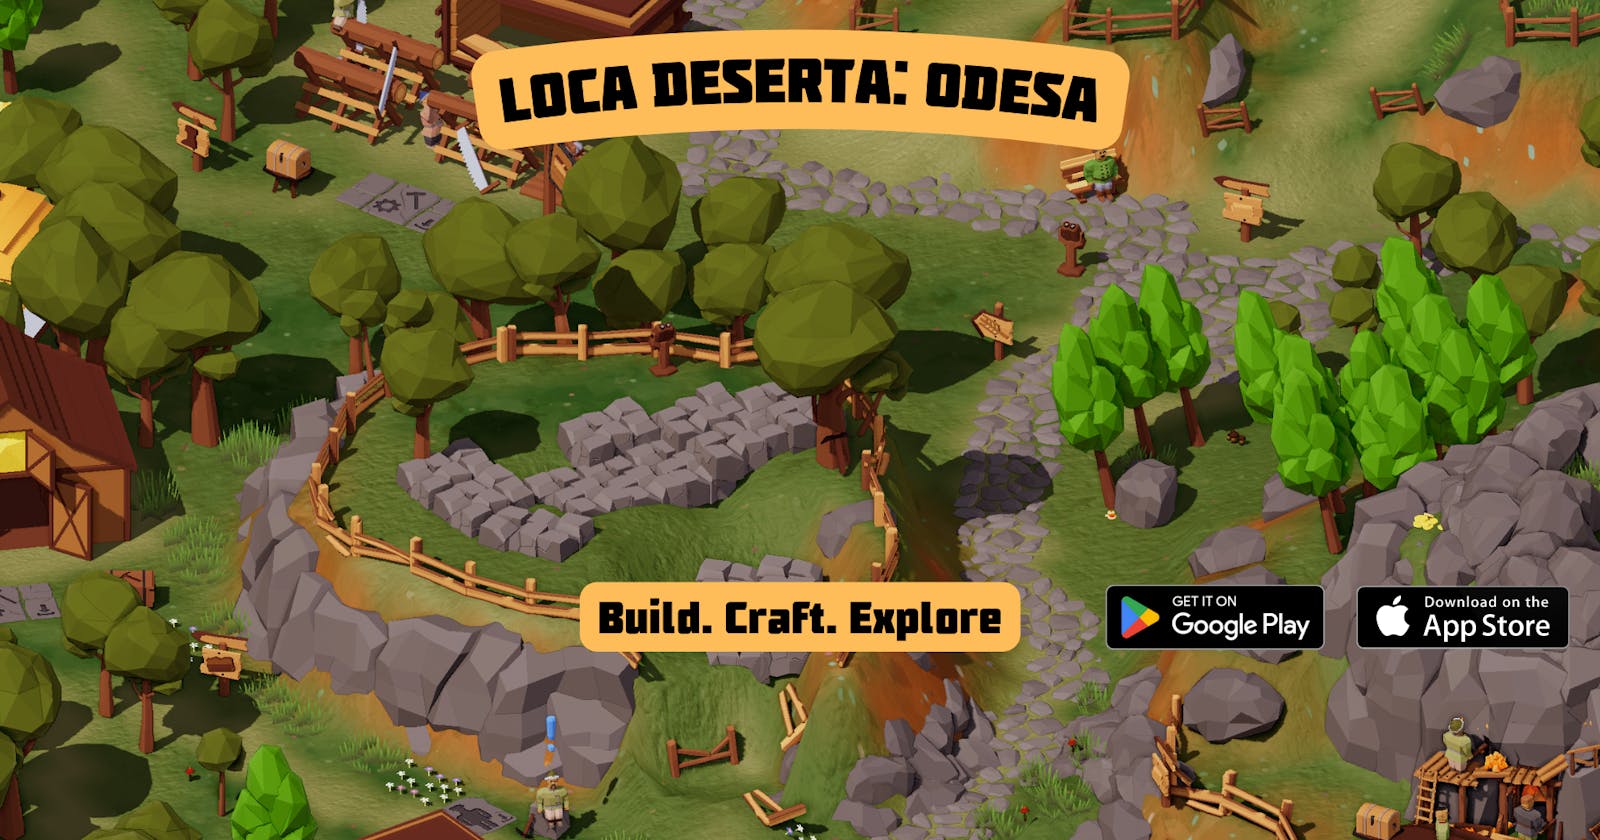 Loca Deserta: Odesa. Available on Apple and Google Stores!